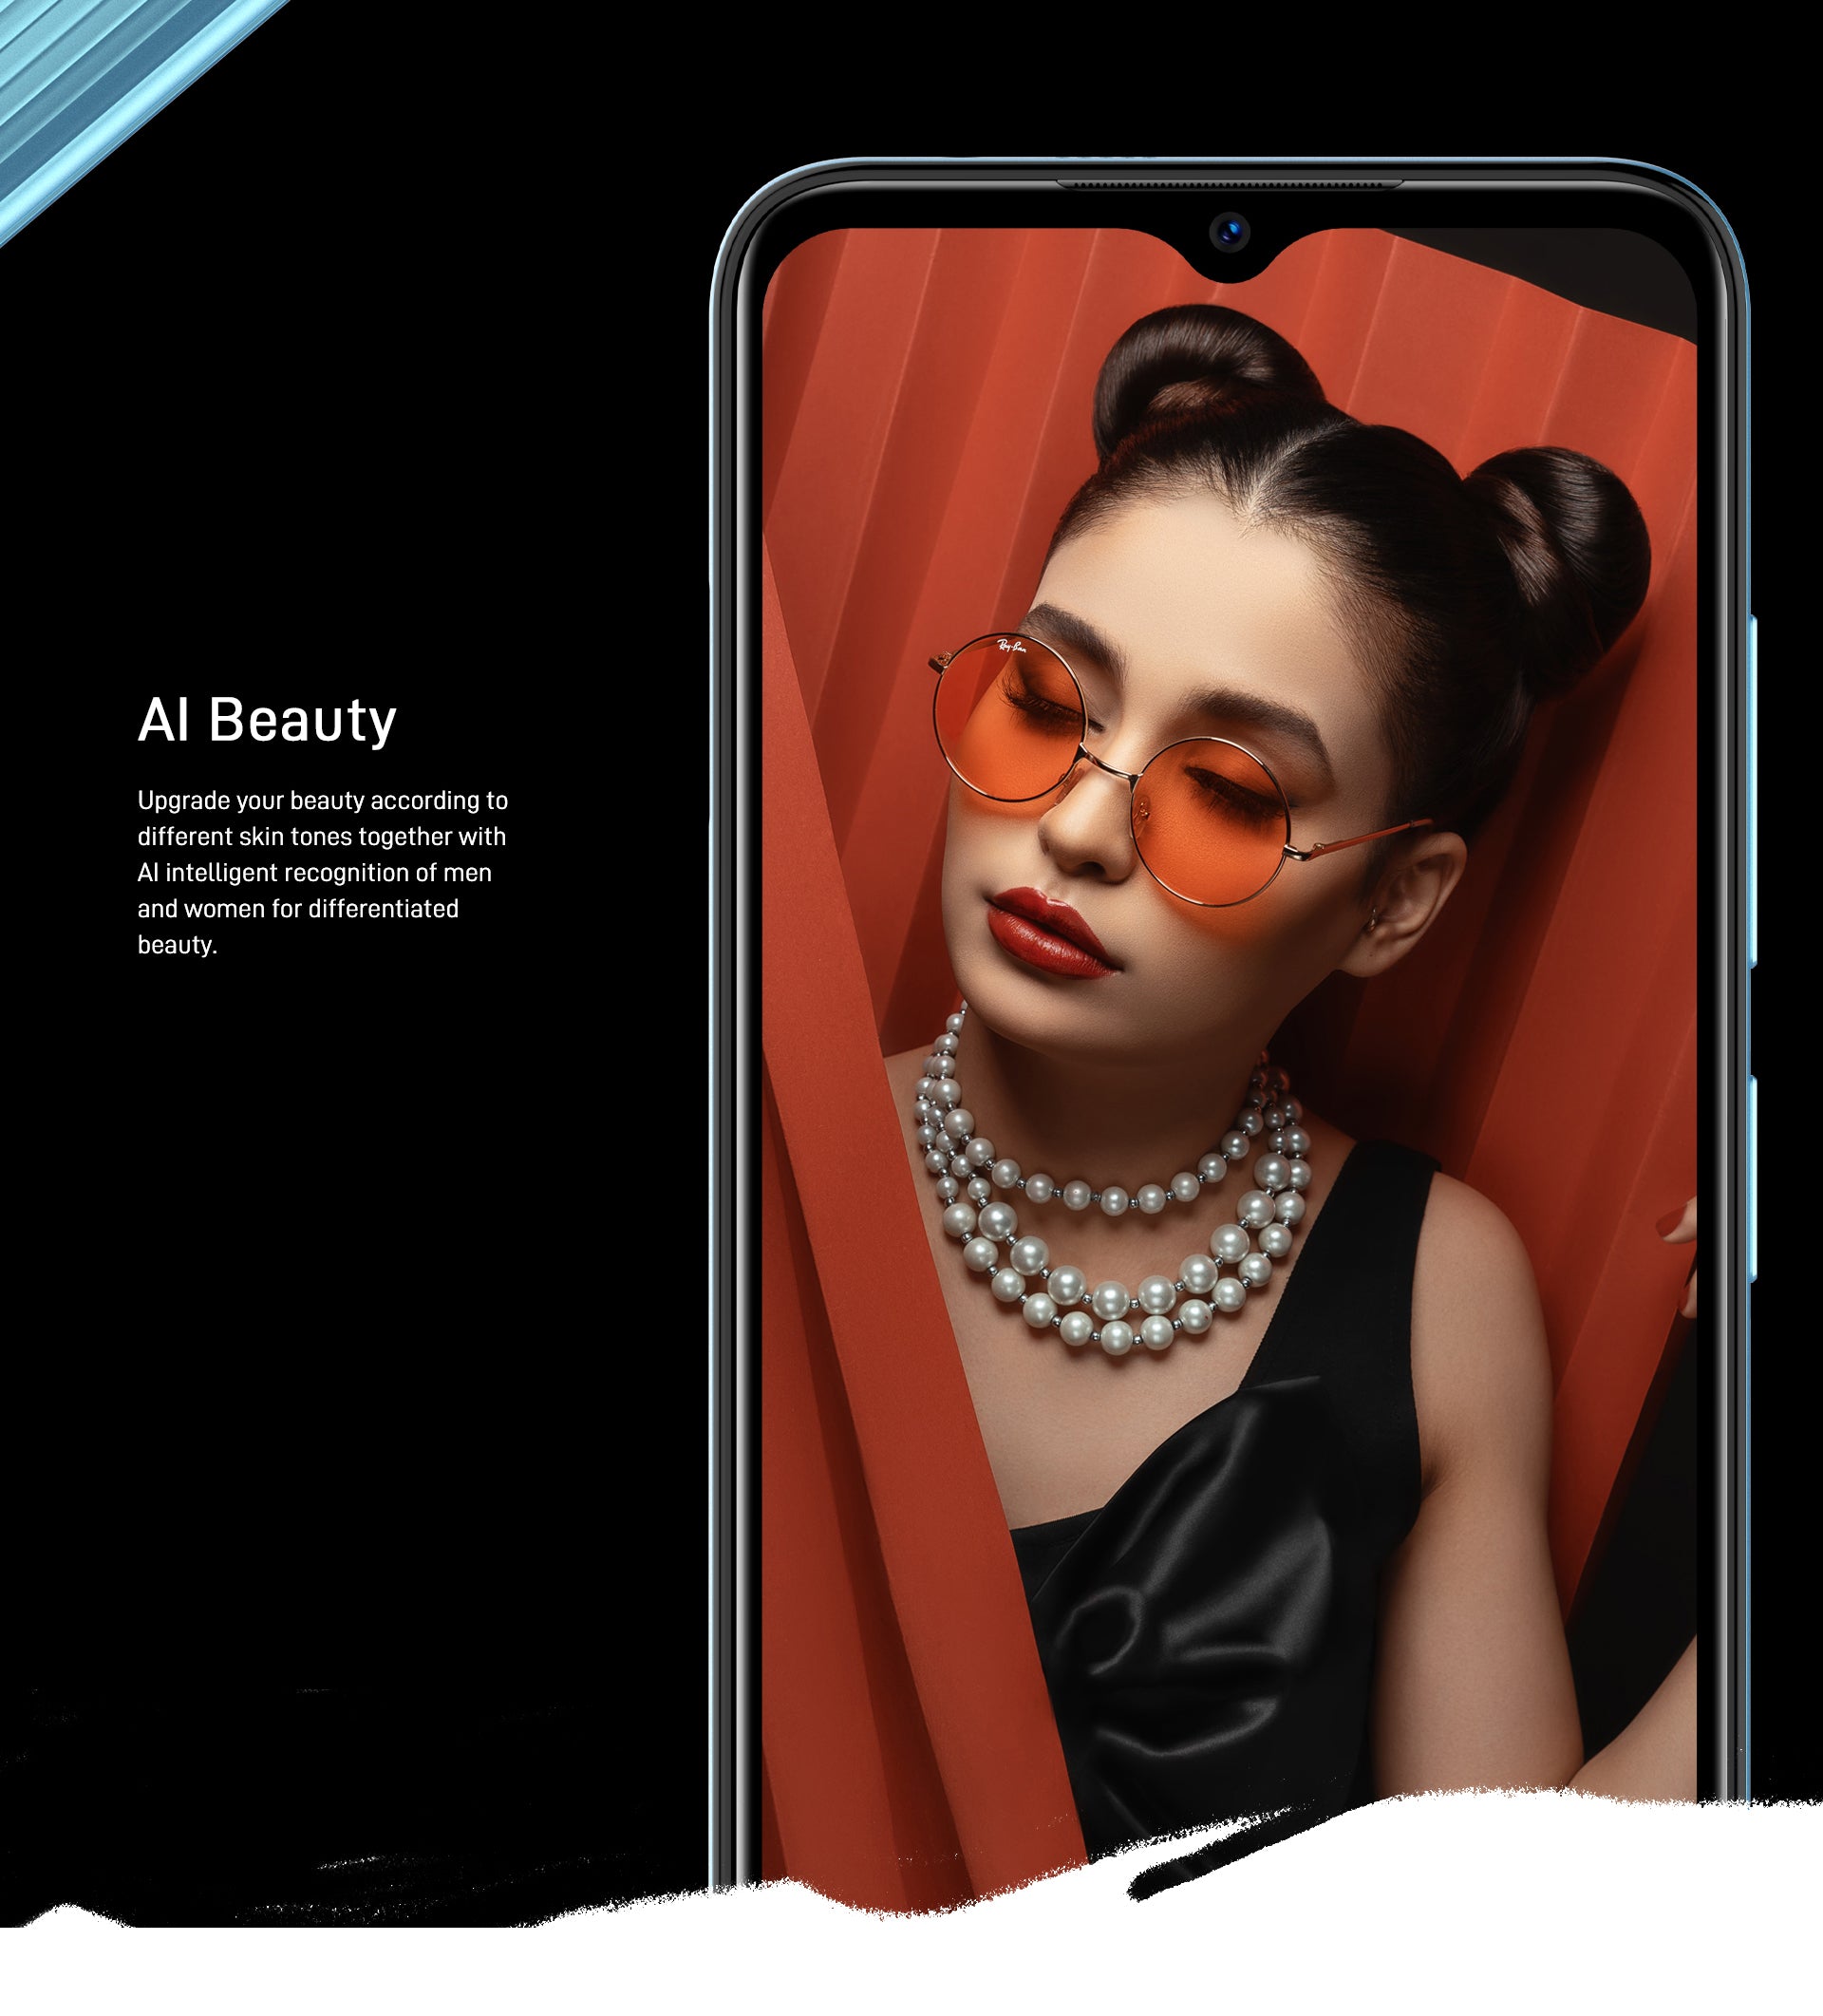 AI Beauty Upgrade your beauty according to different skin tones together with AI intelligent recognition of men and women for differentiated beauty.